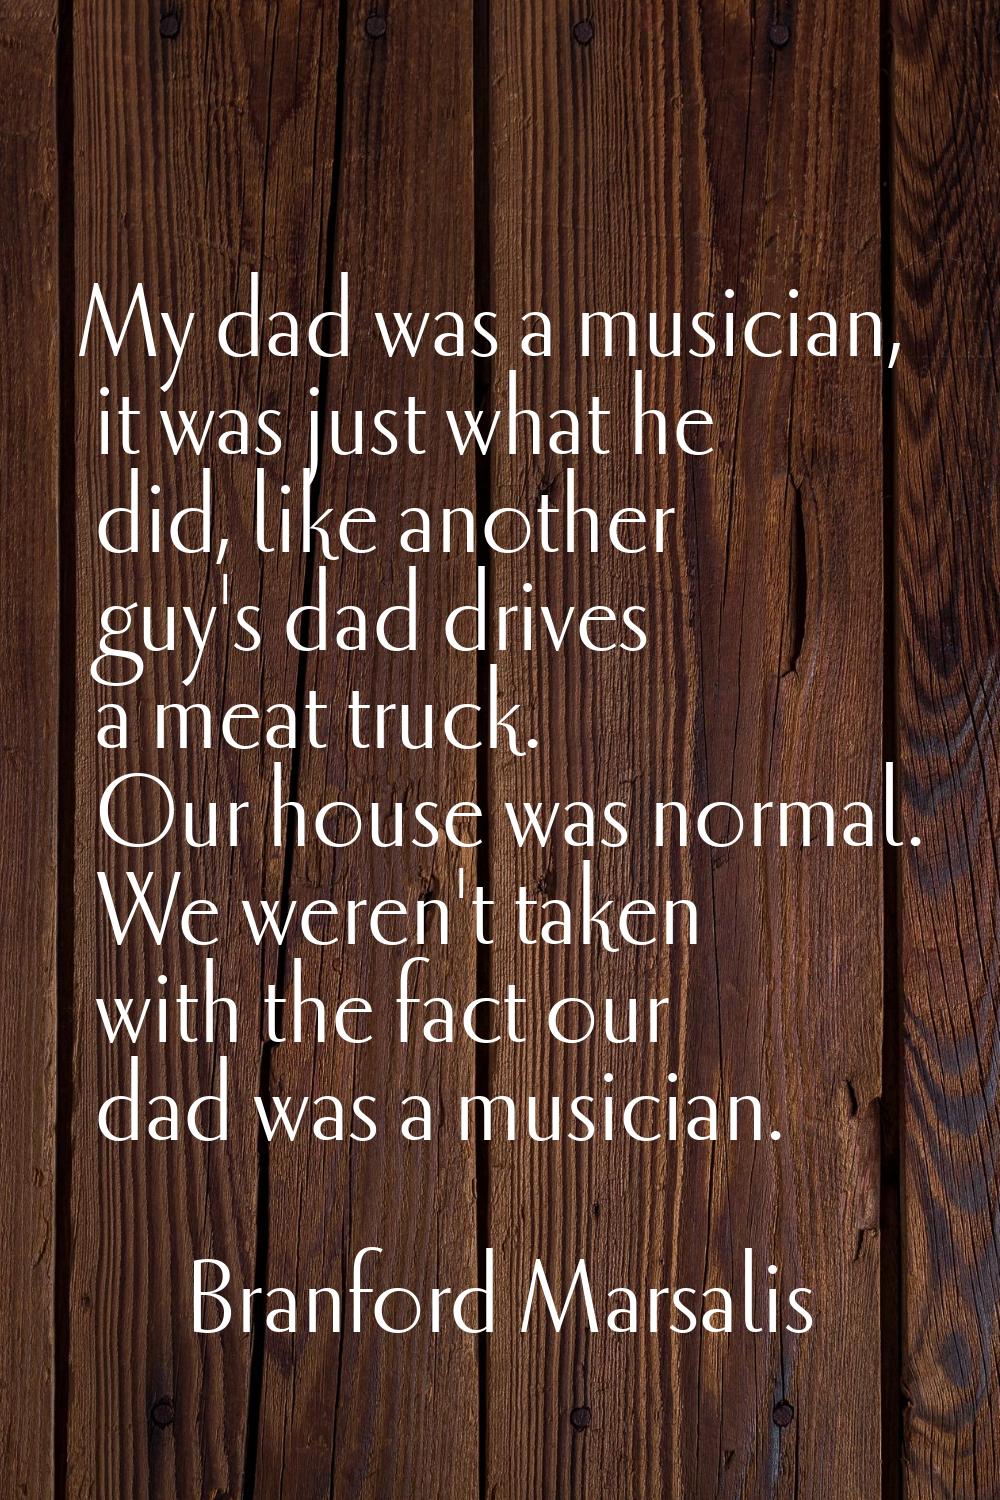 My dad was a musician, it was just what he did, like another guy's dad drives a meat truck. Our hou